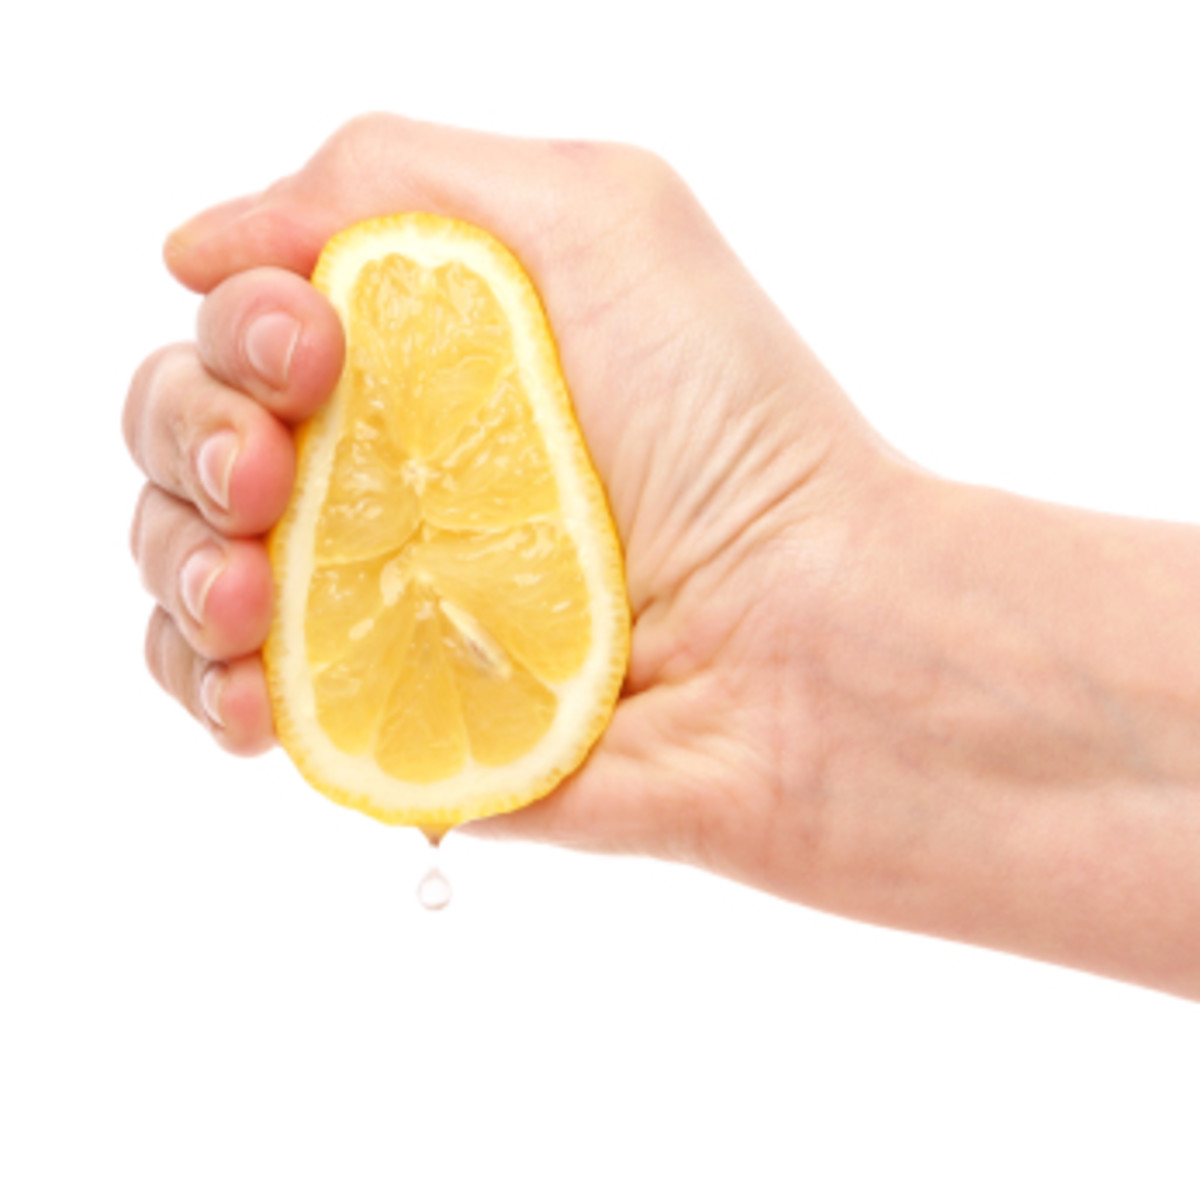 Squeeze 1 lemon into 4 glasses of water and drink first thing in the morning to flush out toxins from your liver, kidney, and bowel.